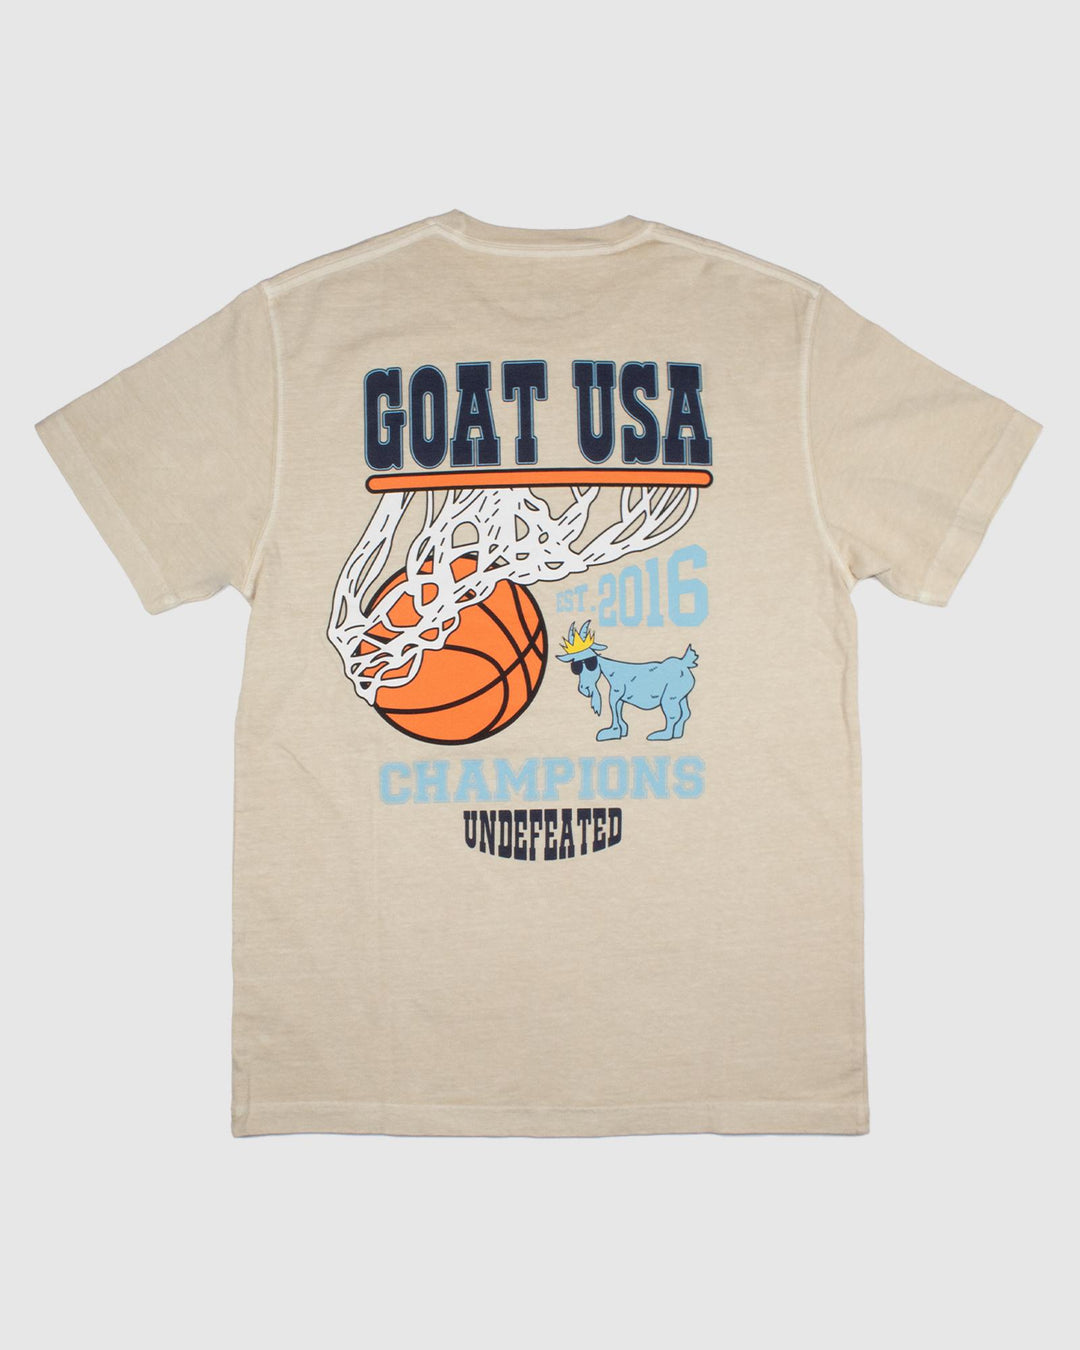 Sandshell colored t-shirt that reads 'Undefeated Champions' with basketball design